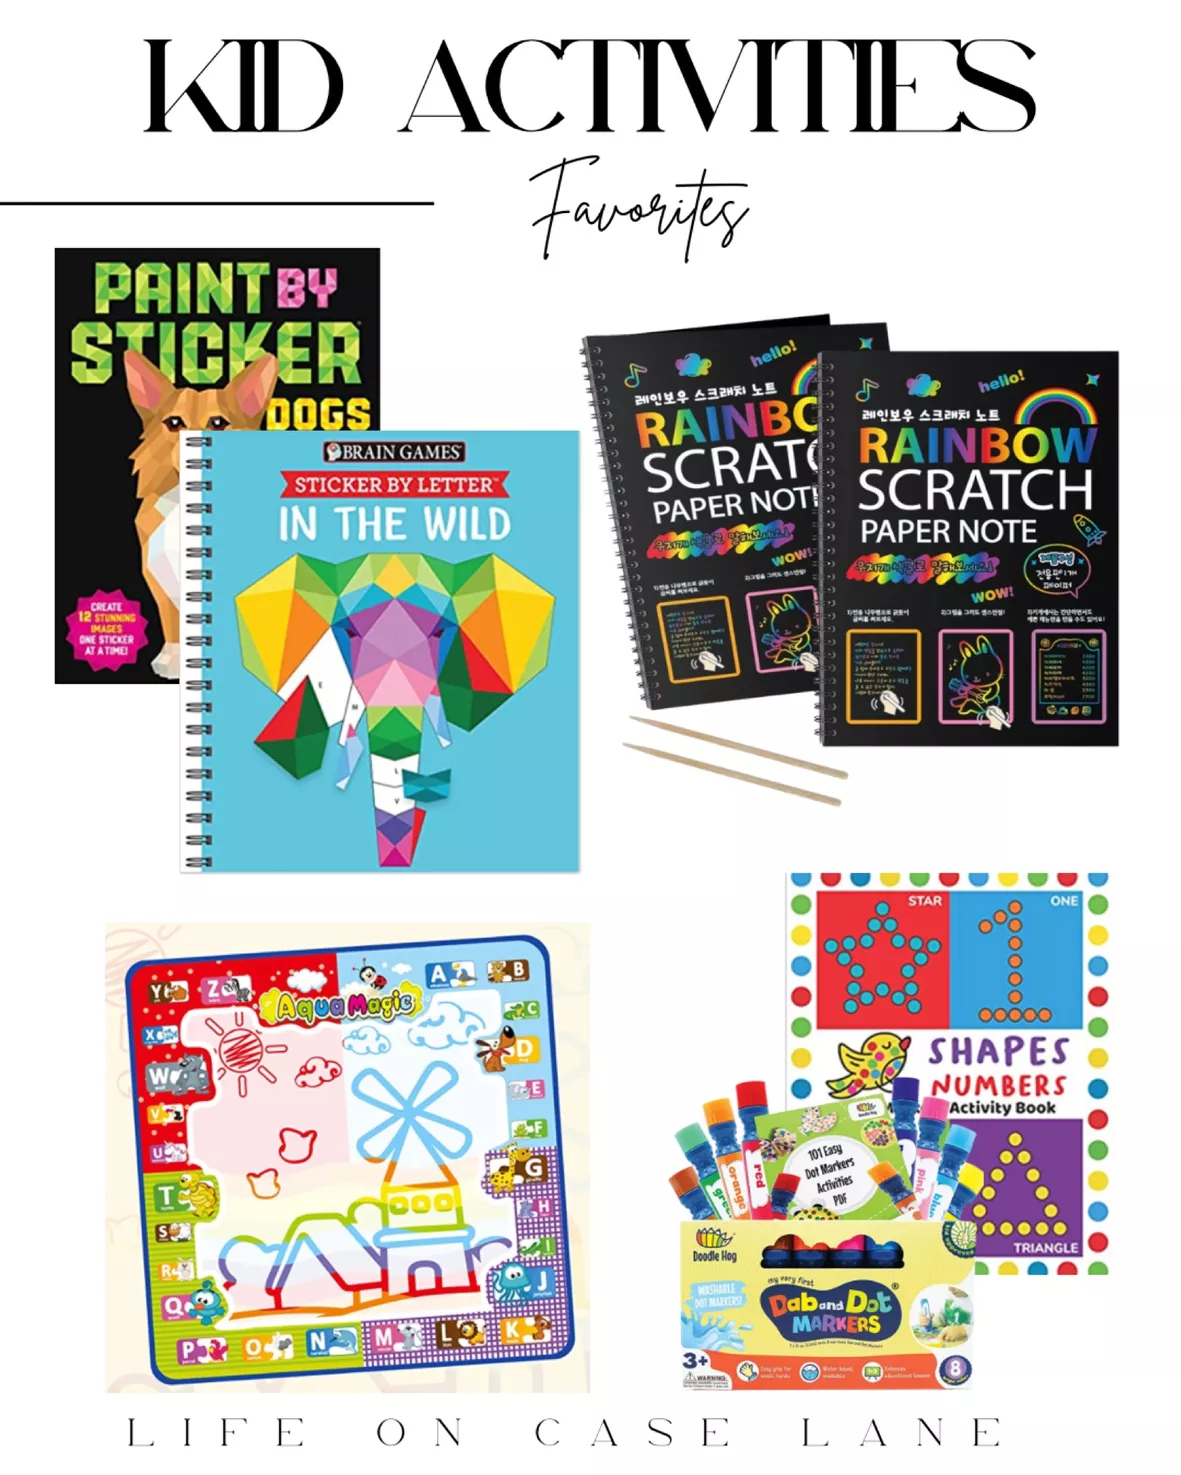 Paint by Sticker Books: The Best Mosaic Sticker Books Roundup - Friday  We're In Love